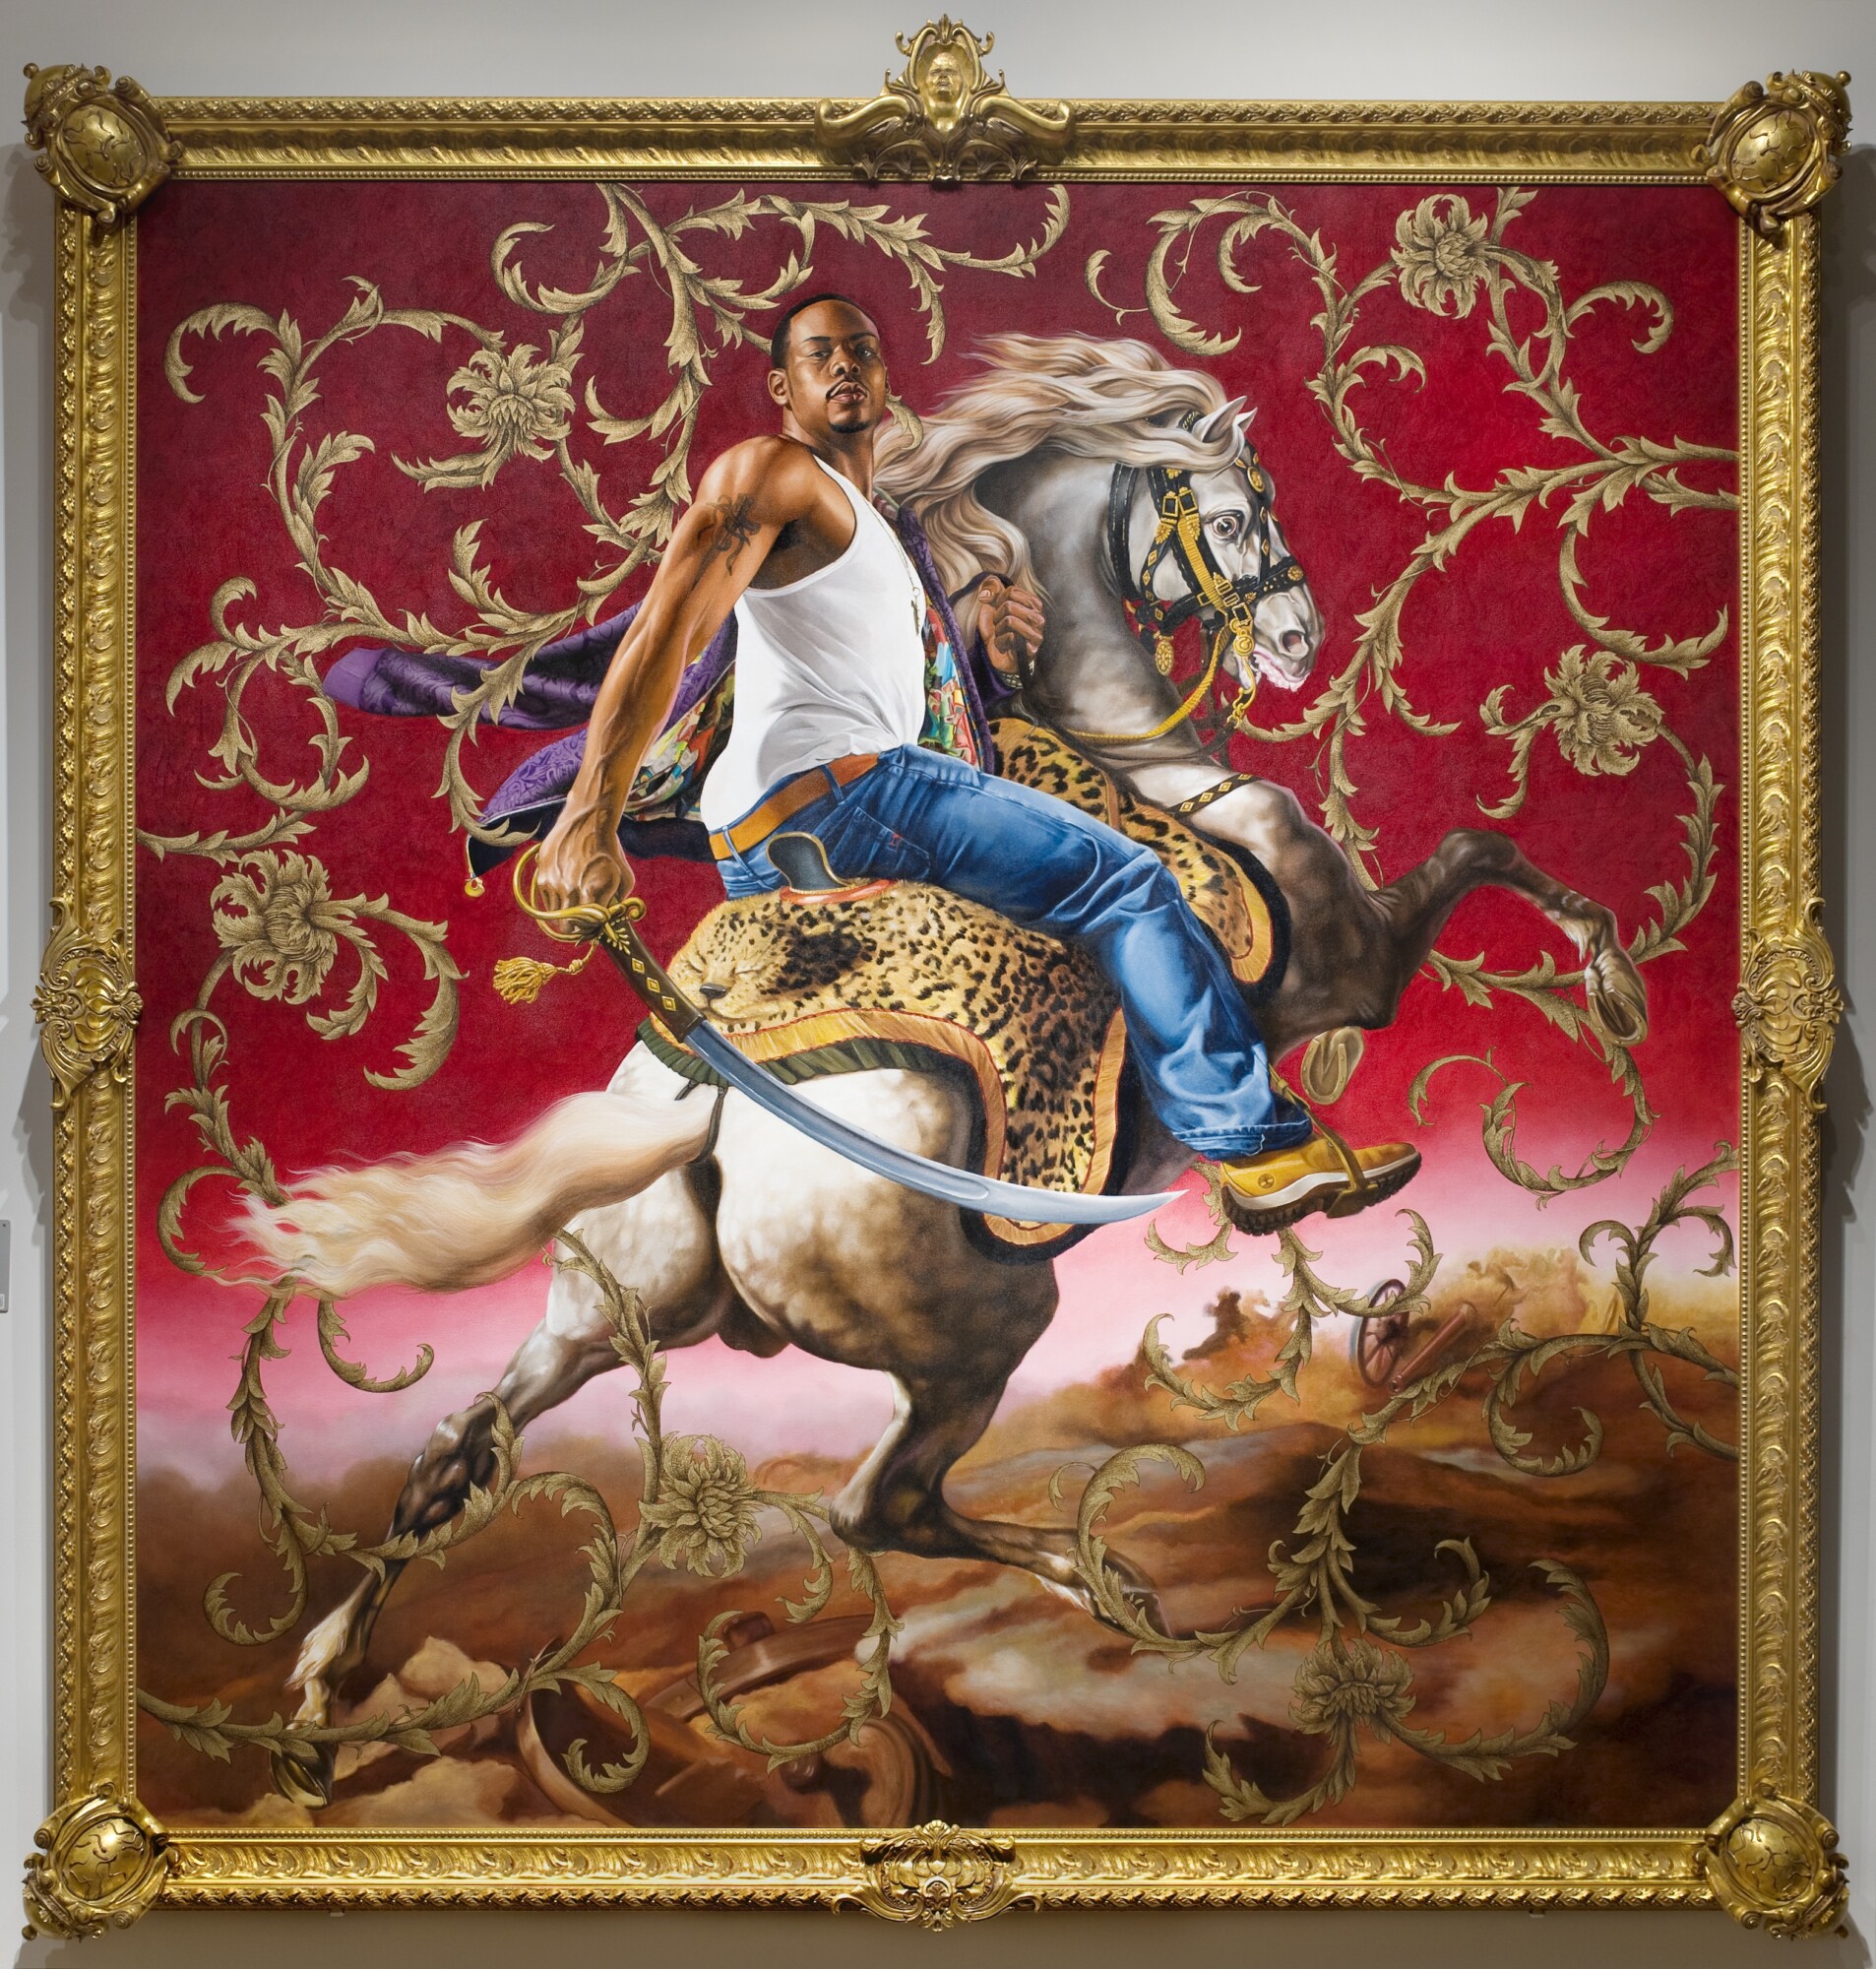 kehindewiley_a new republic_Officer of the Hussars